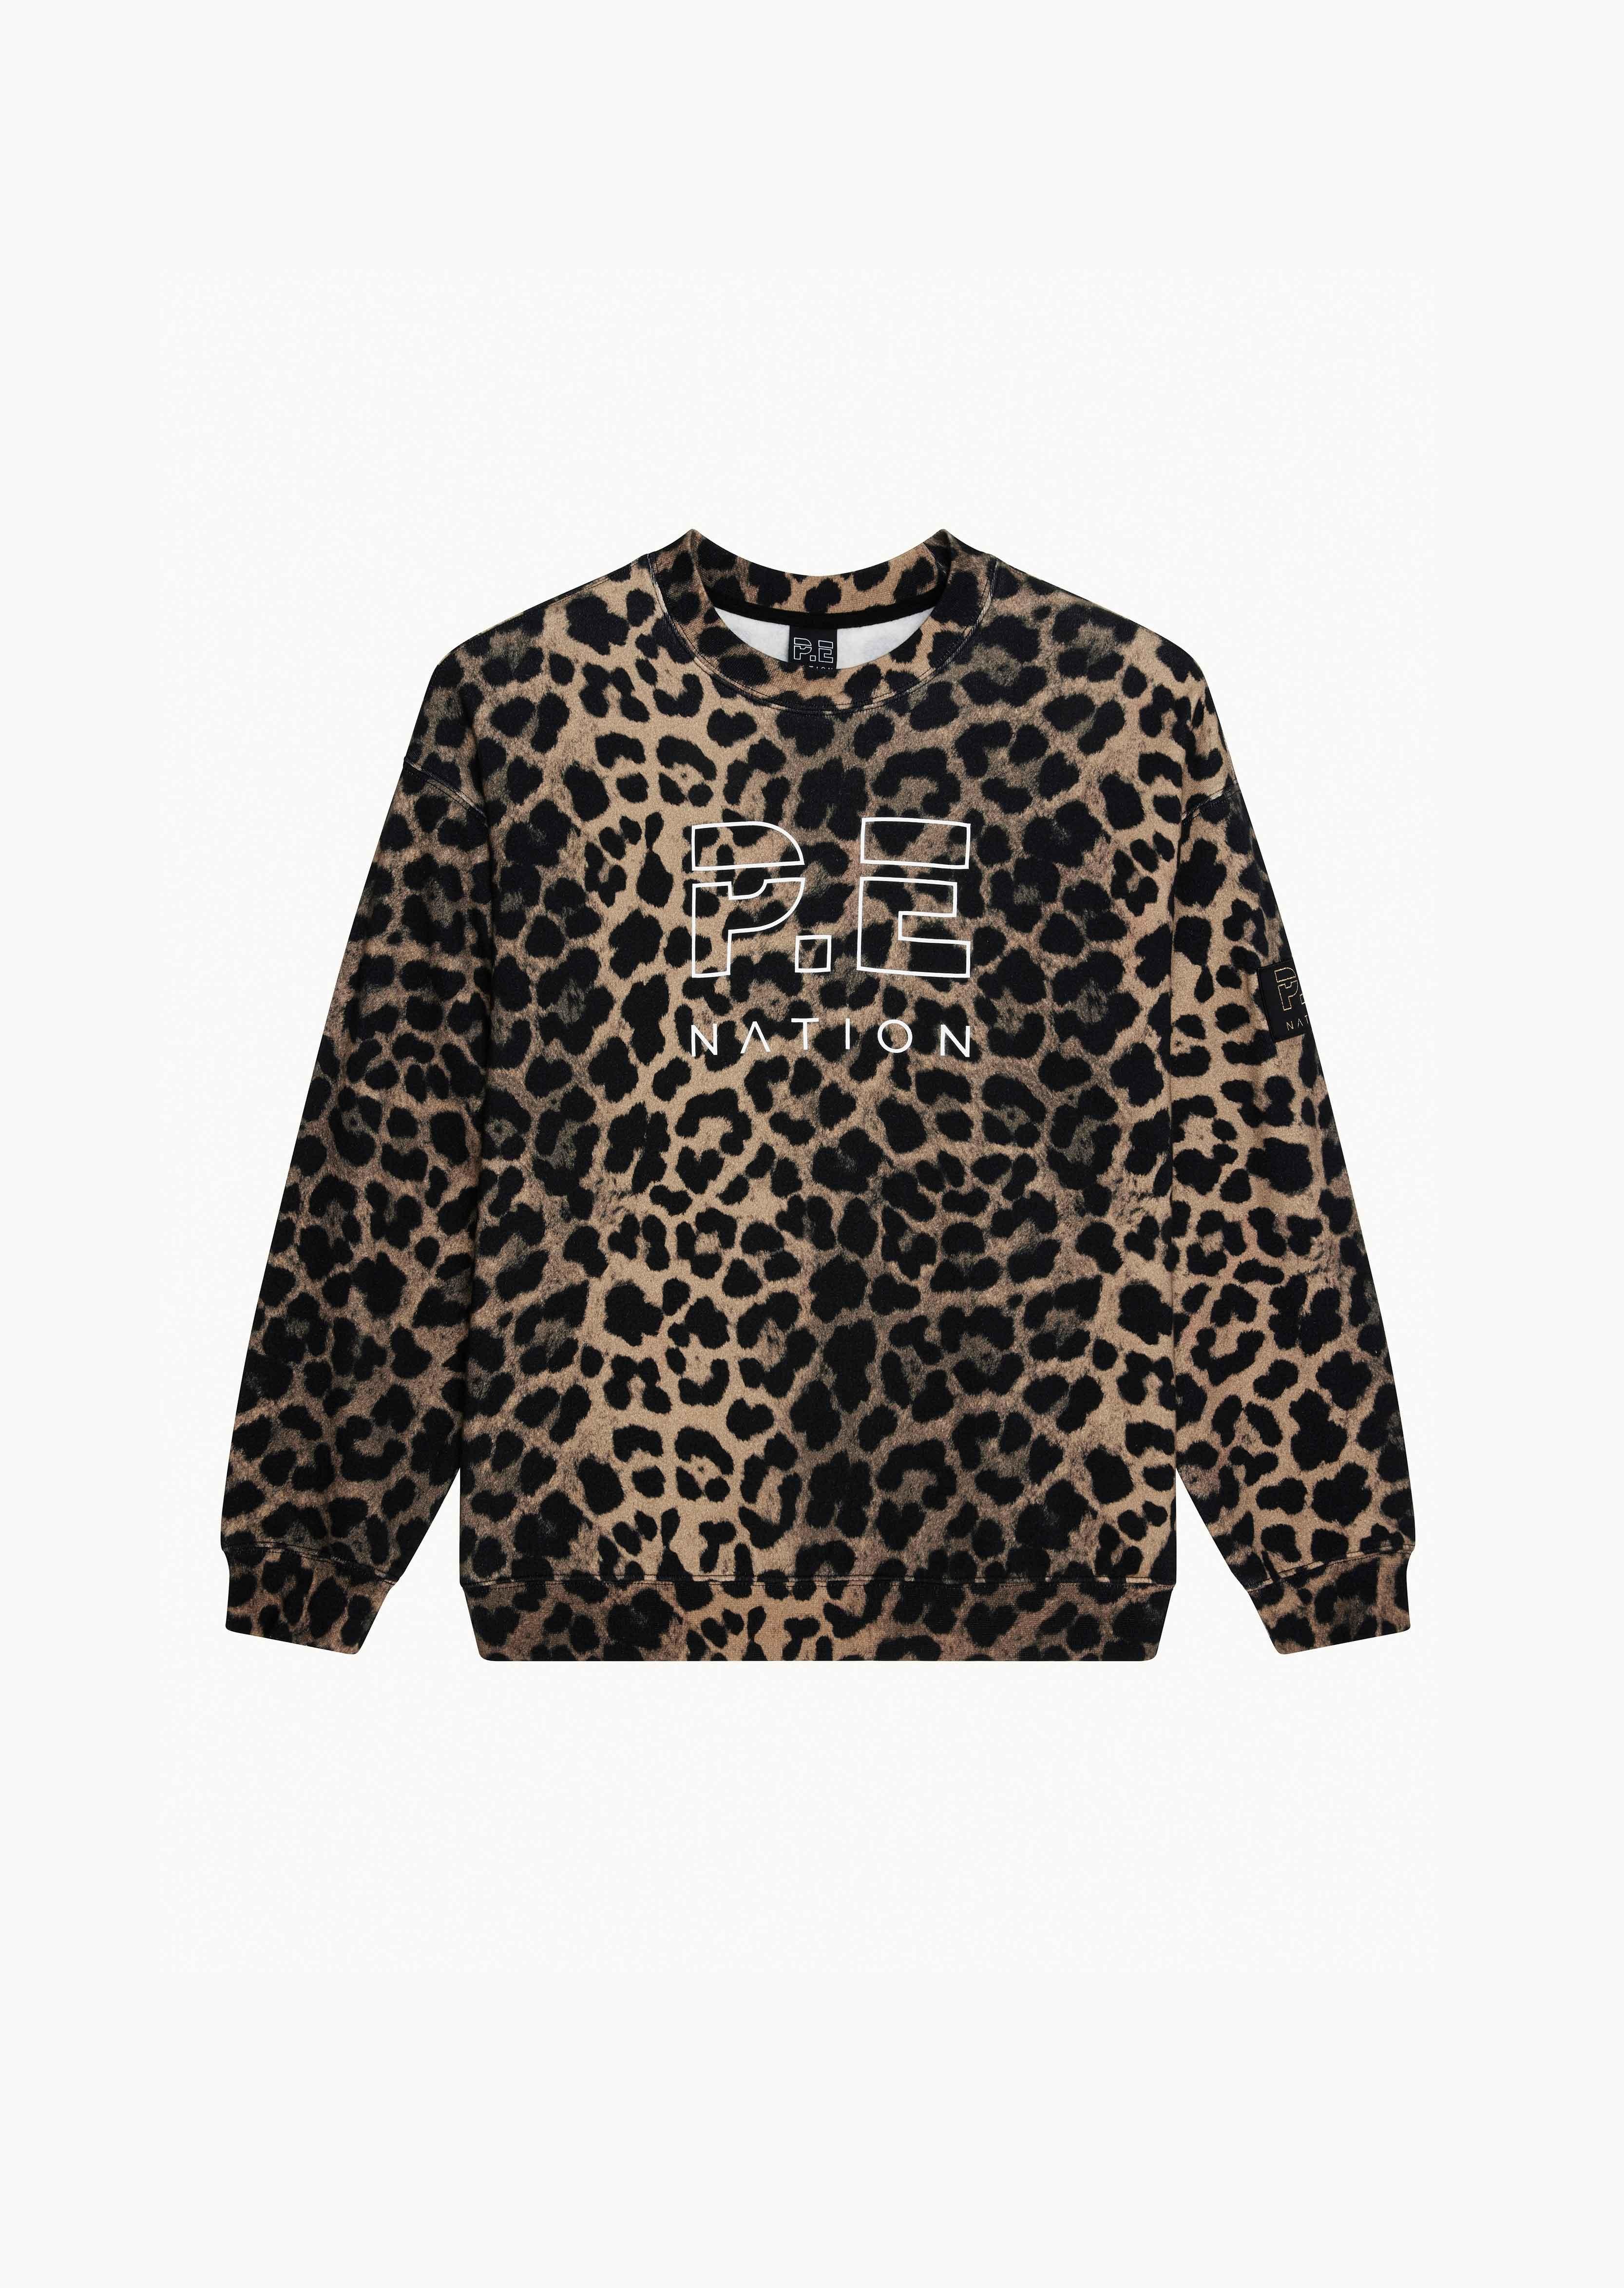 ELEMENT SWEAT IN ANIMAL PRINT by P.E NATION